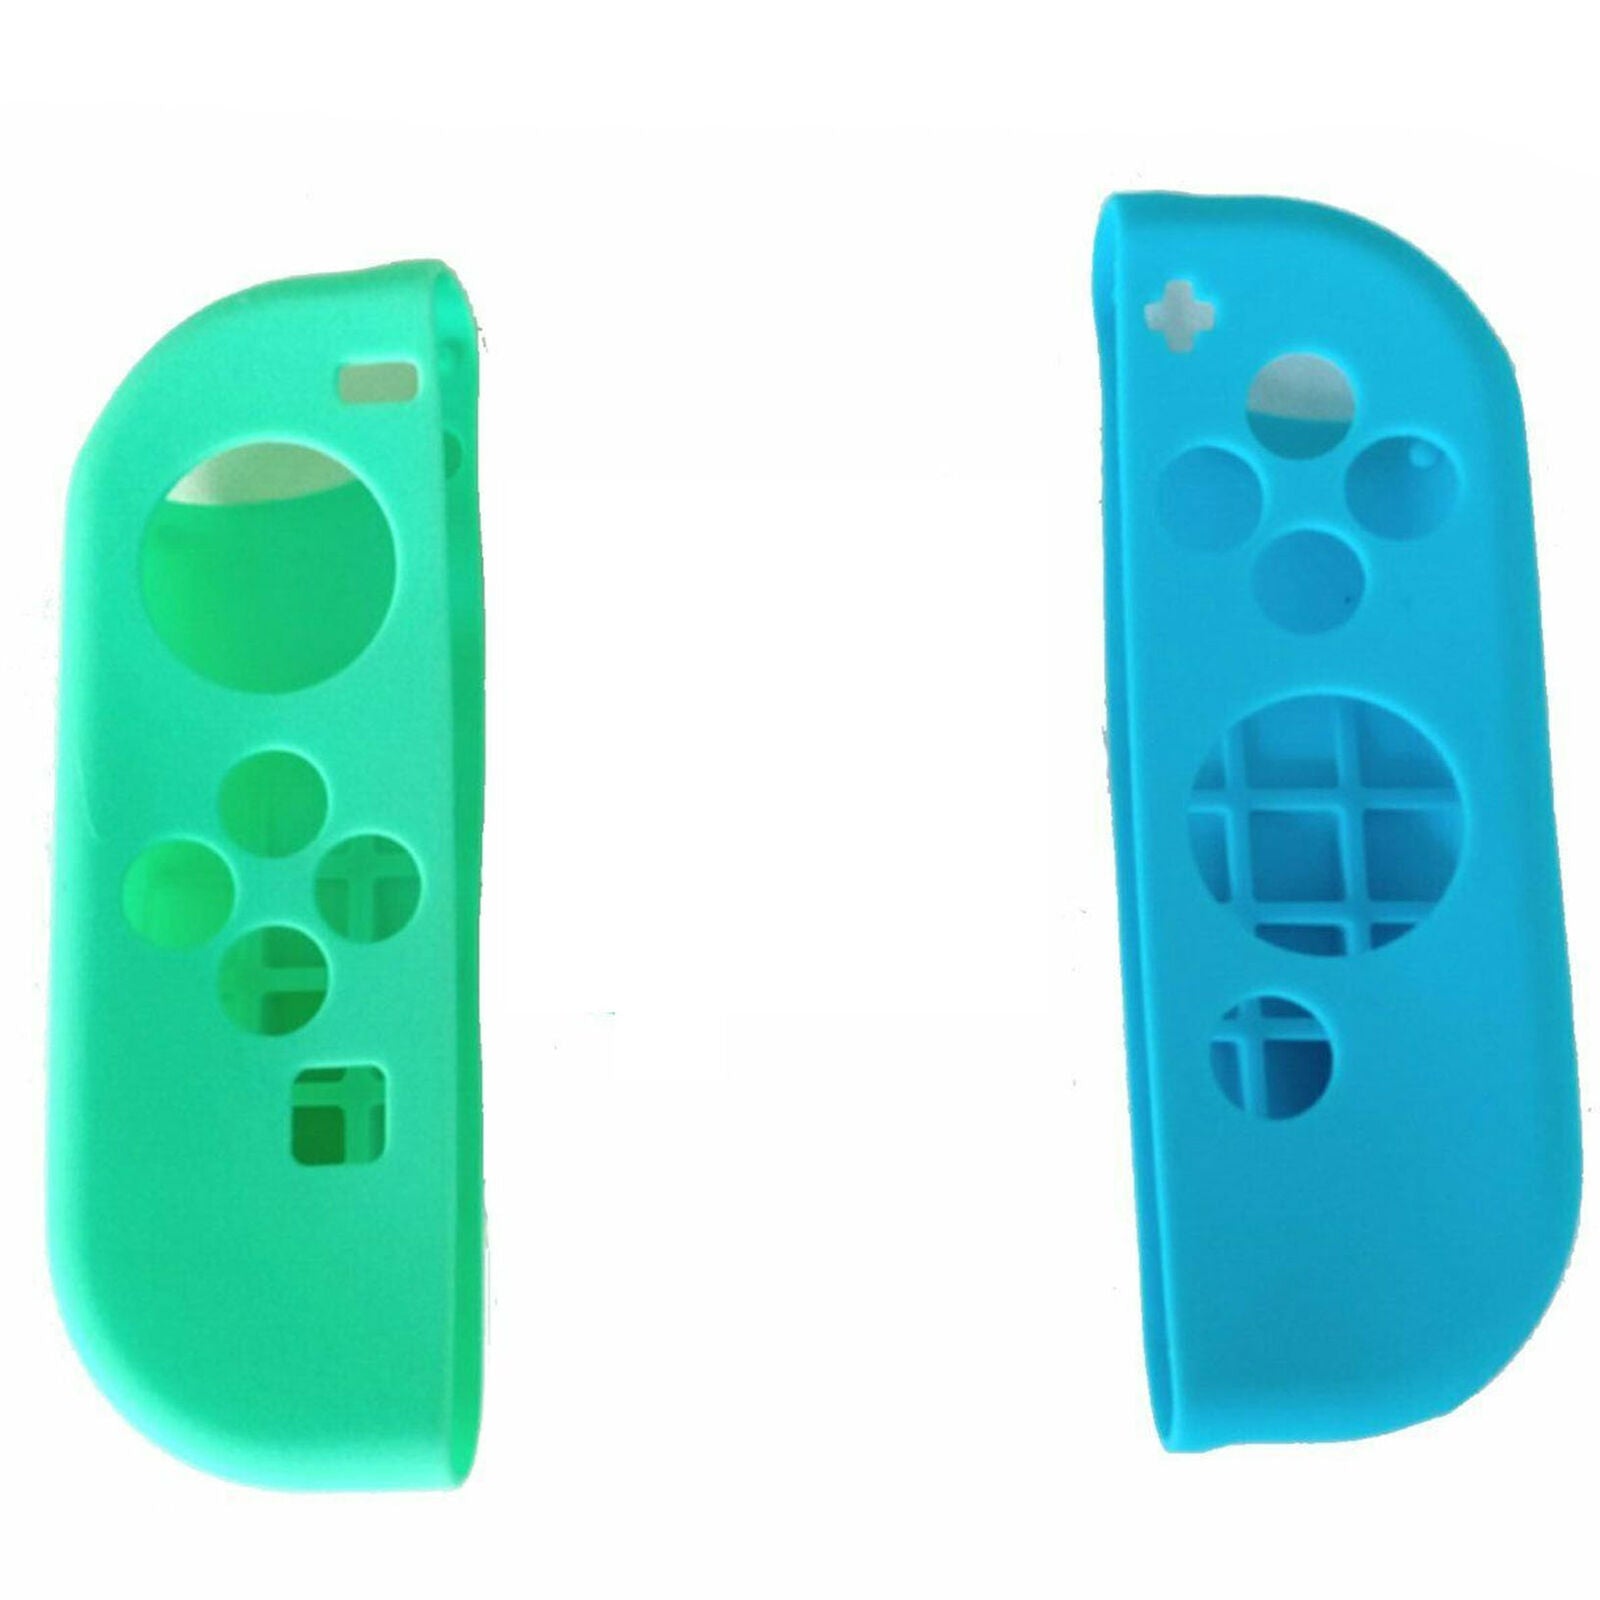 Controller Protective Shell Case + Thumb Grips Cap For Nintendo Switch Game